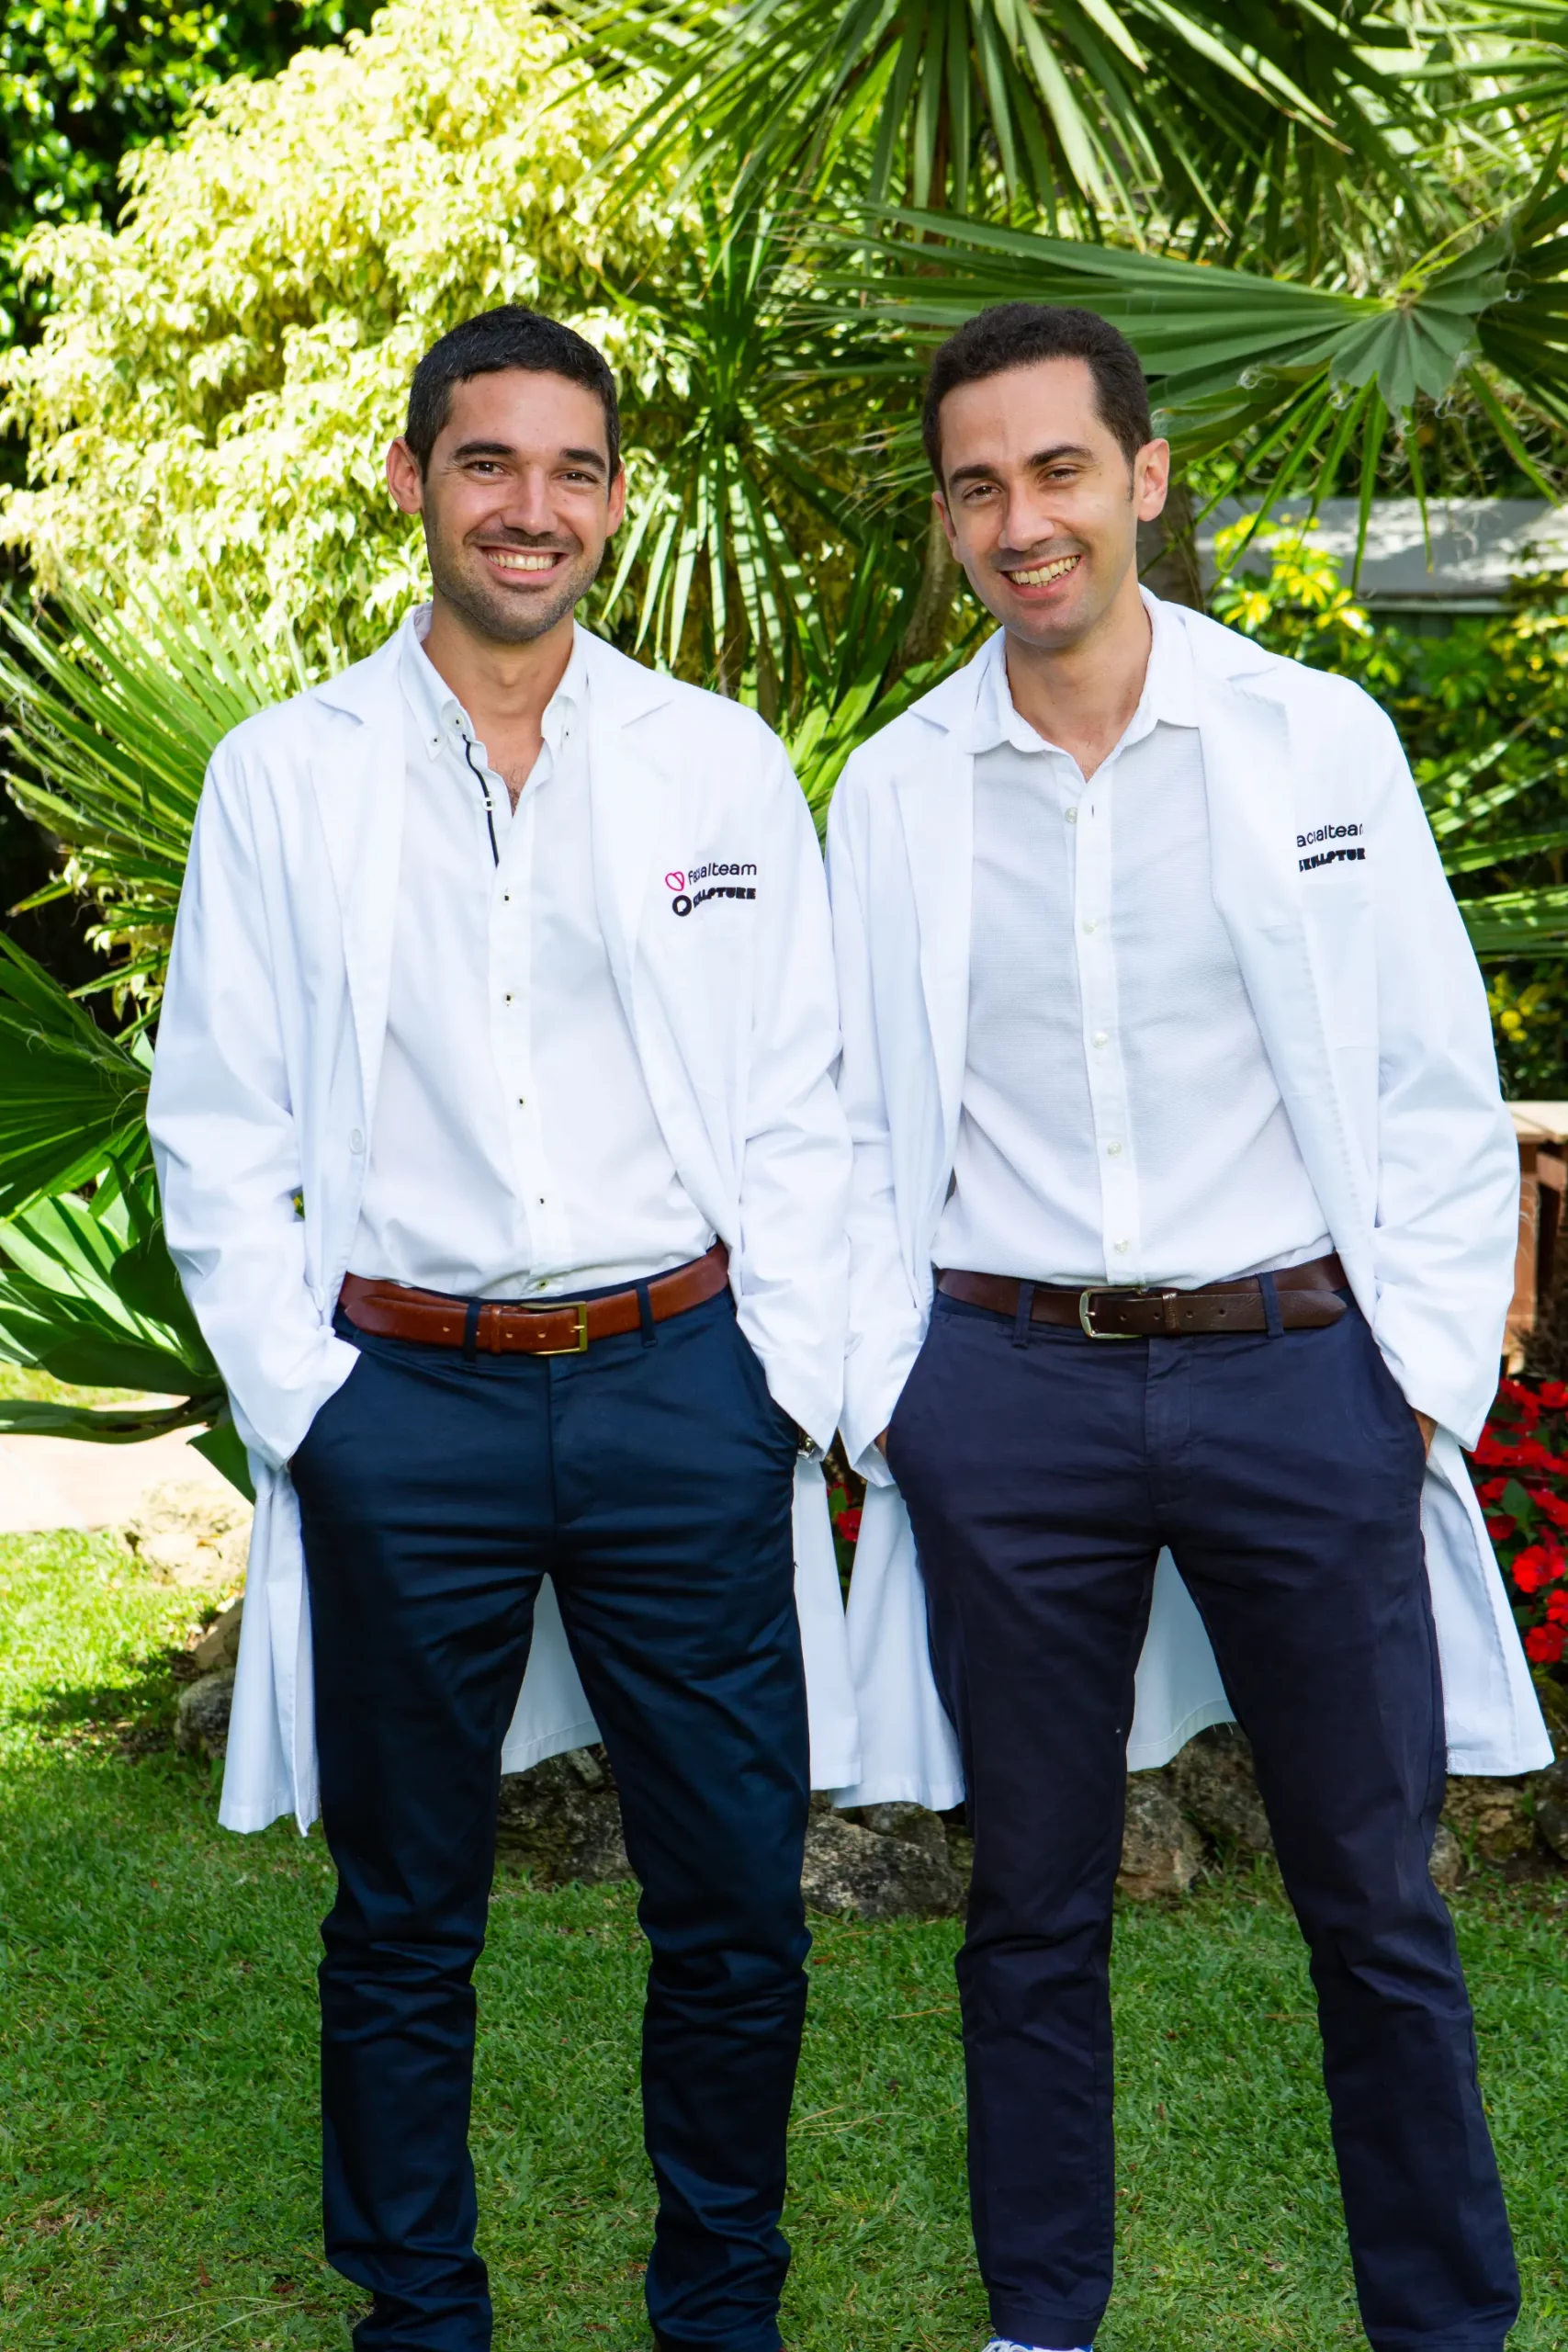 Facial Feminization Researchers Dr. Fermín Capitán and Dr. Miguel Perceval, specialized facial feminization scientists at Facialteam, a clinic for FFS surgery.